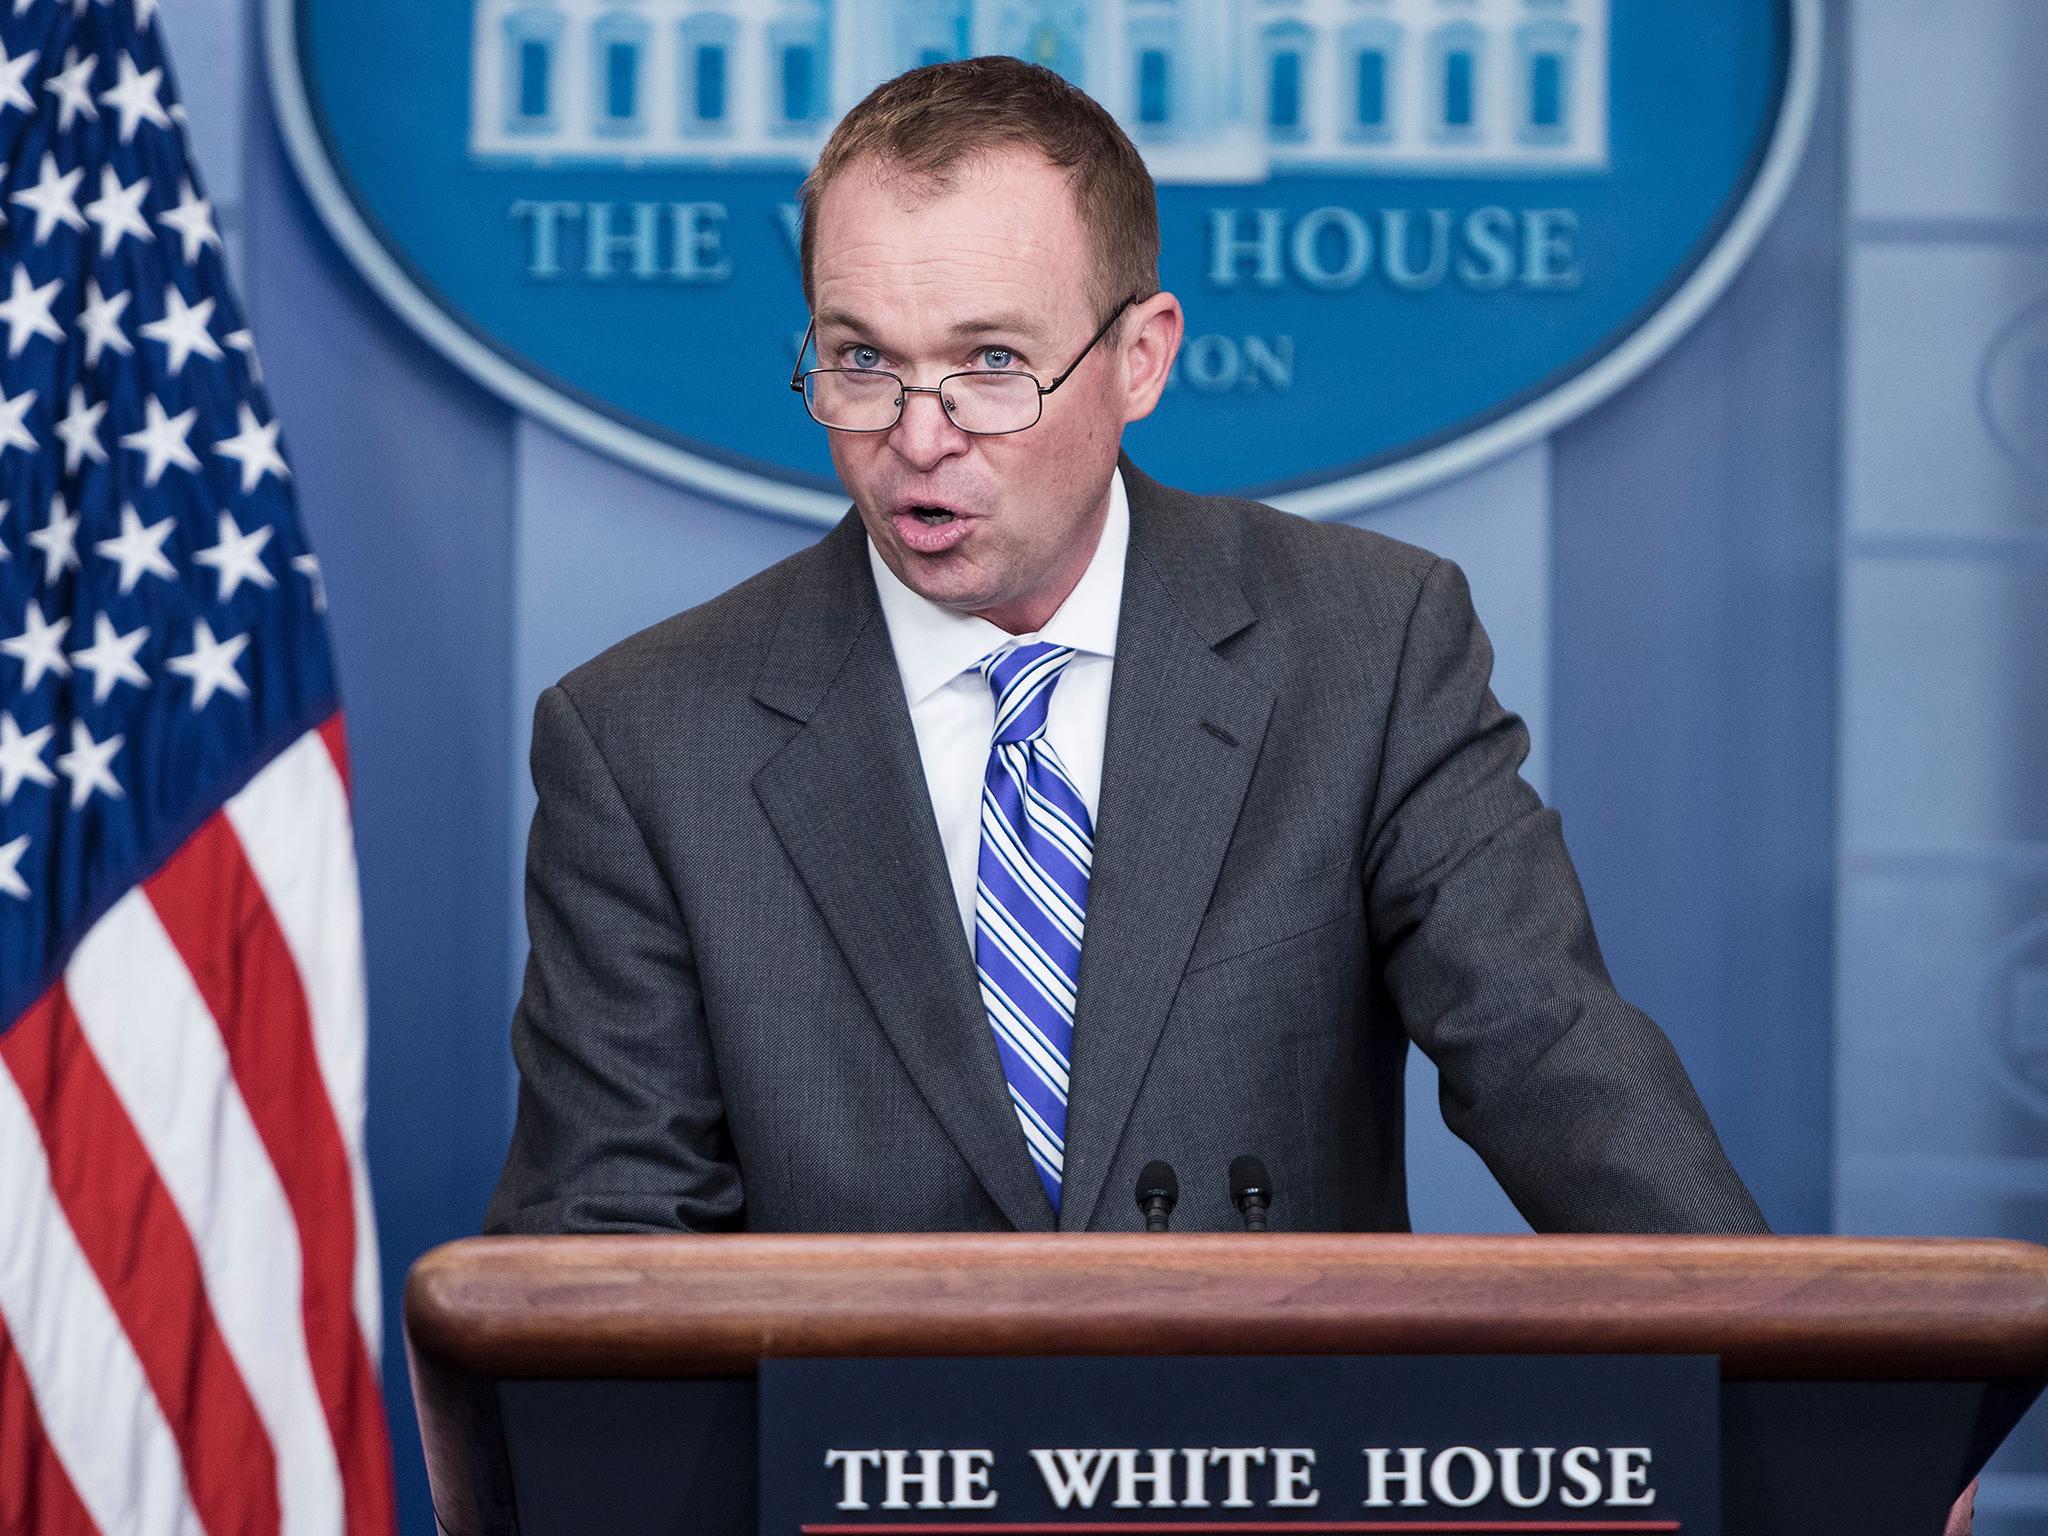 White House Budget Chief Mick Mulvaney has defended the cuts saying they wanted to give taxpayers value for money